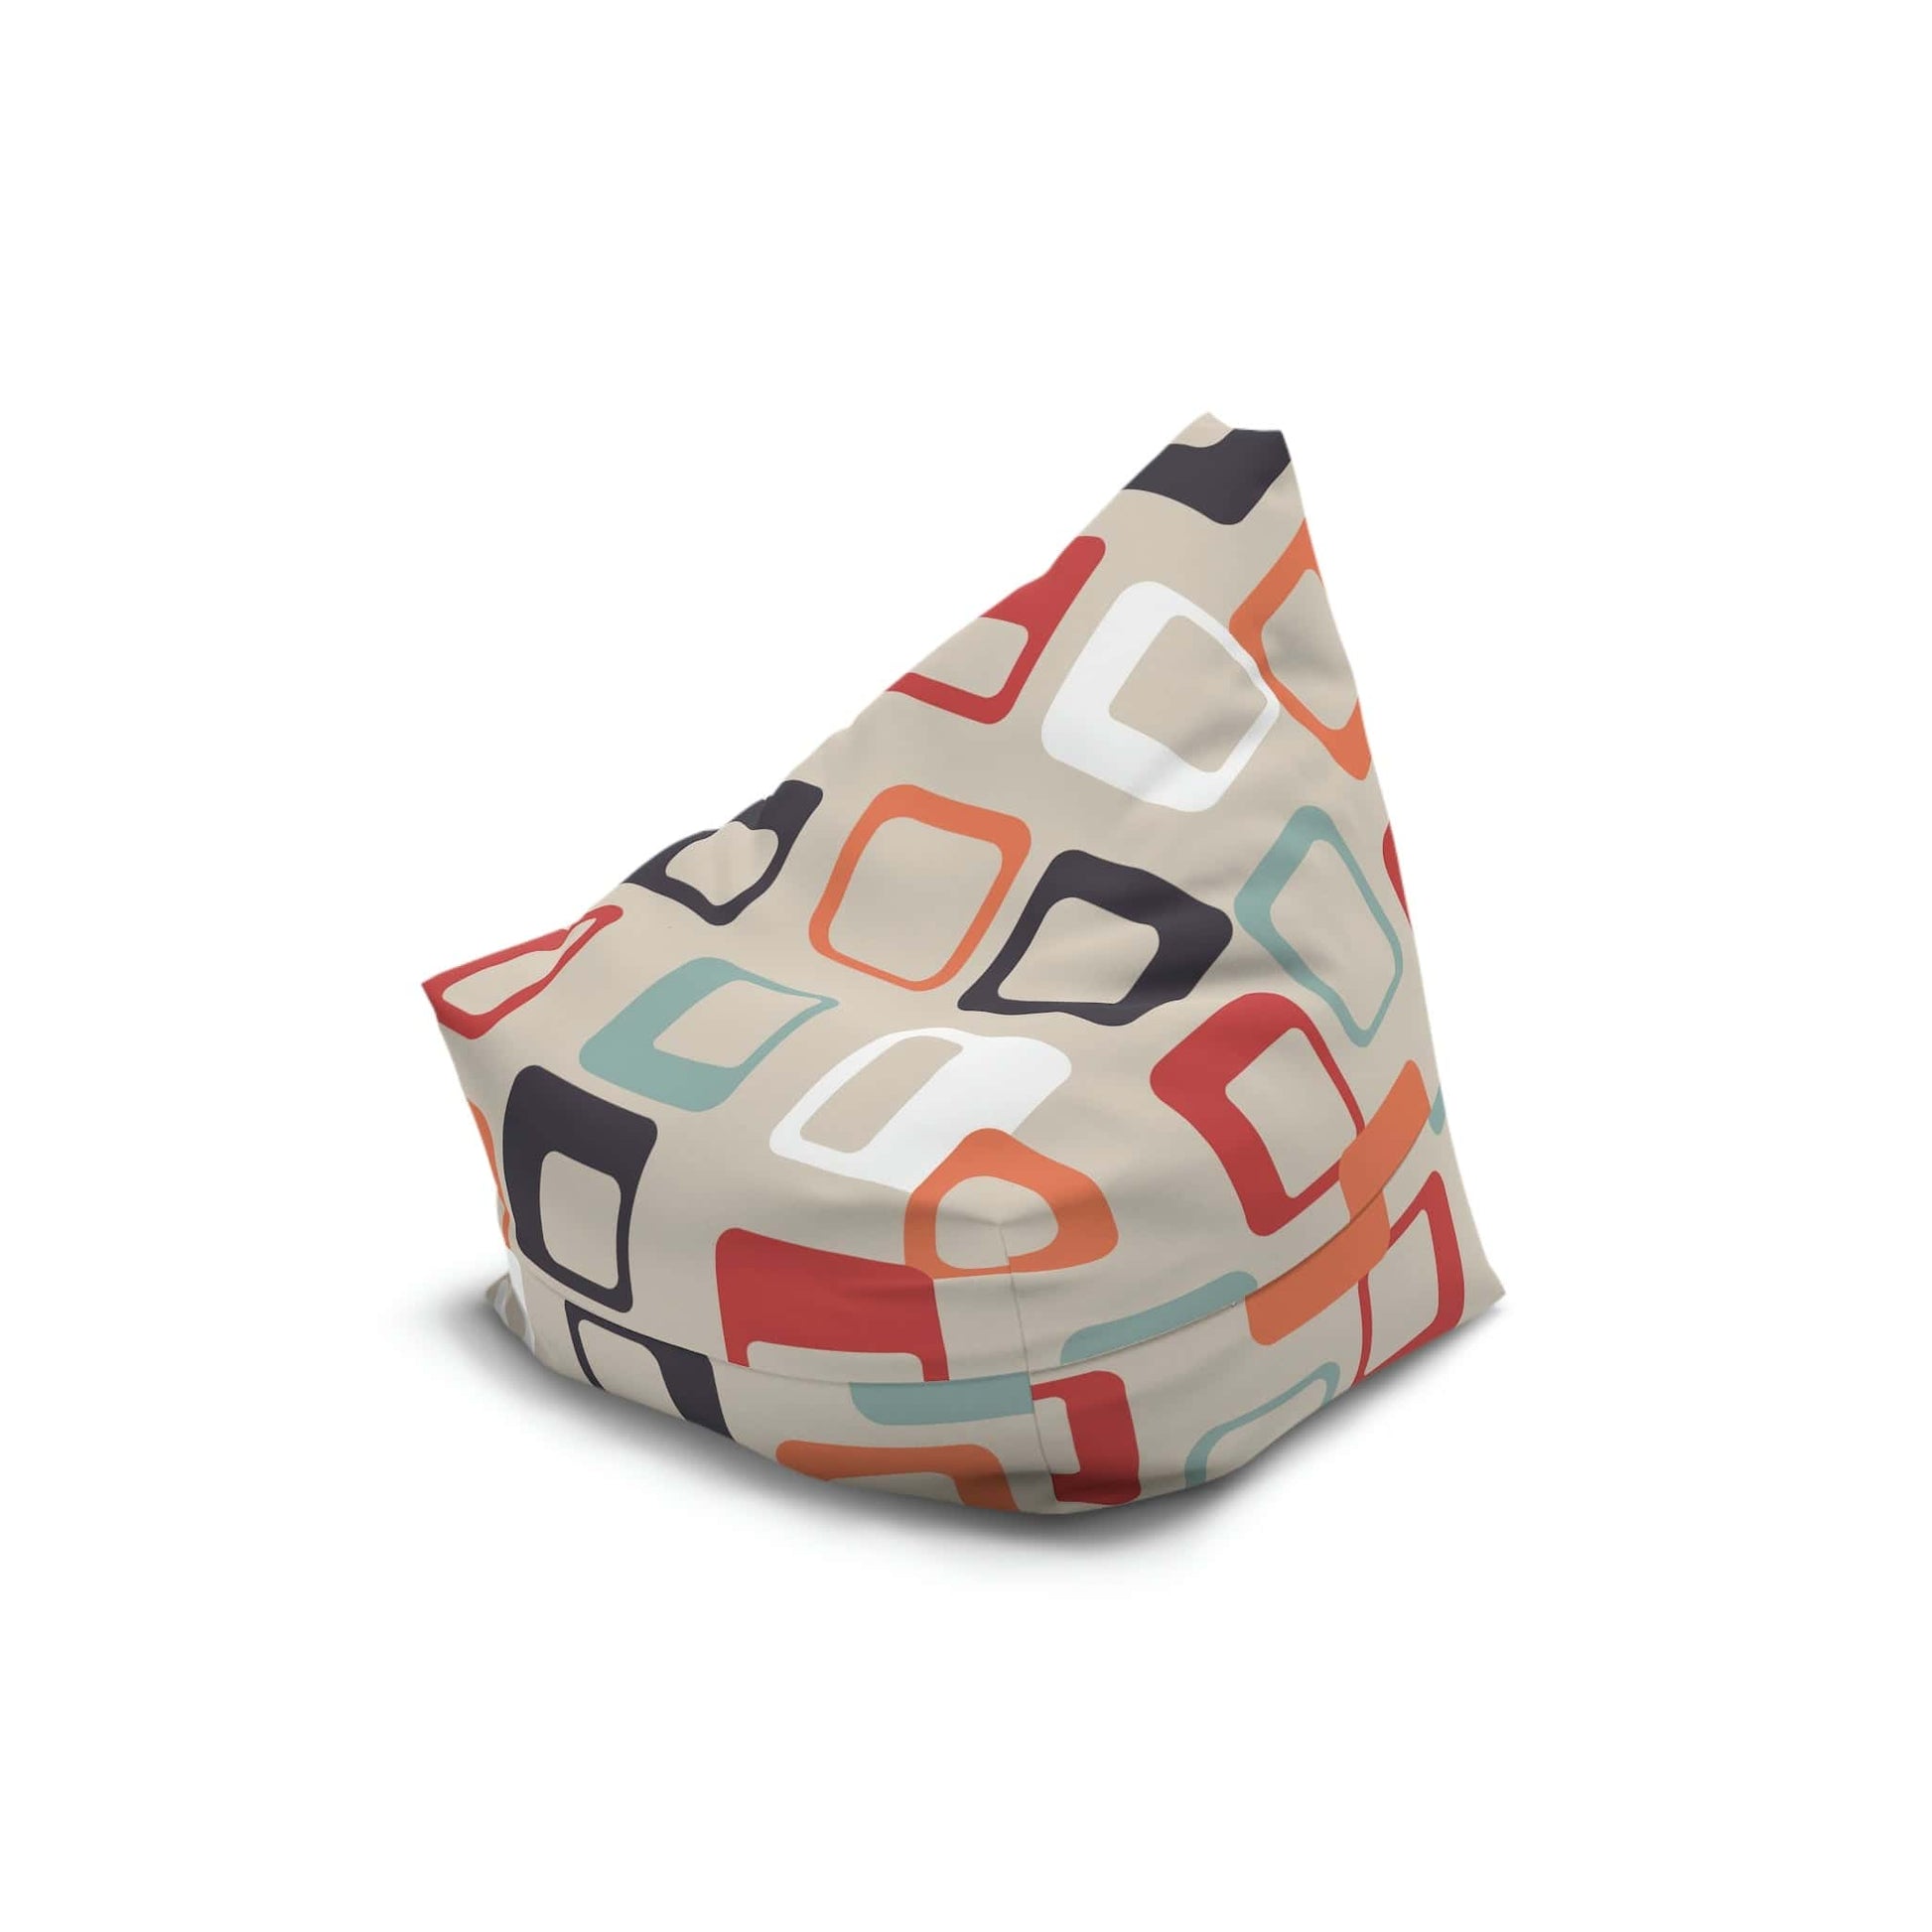 Kate McEnroe New York Retro Groovy Psychedelic Geometric Squares Bean Bag Chair Cover Bean Bag Chair Covers